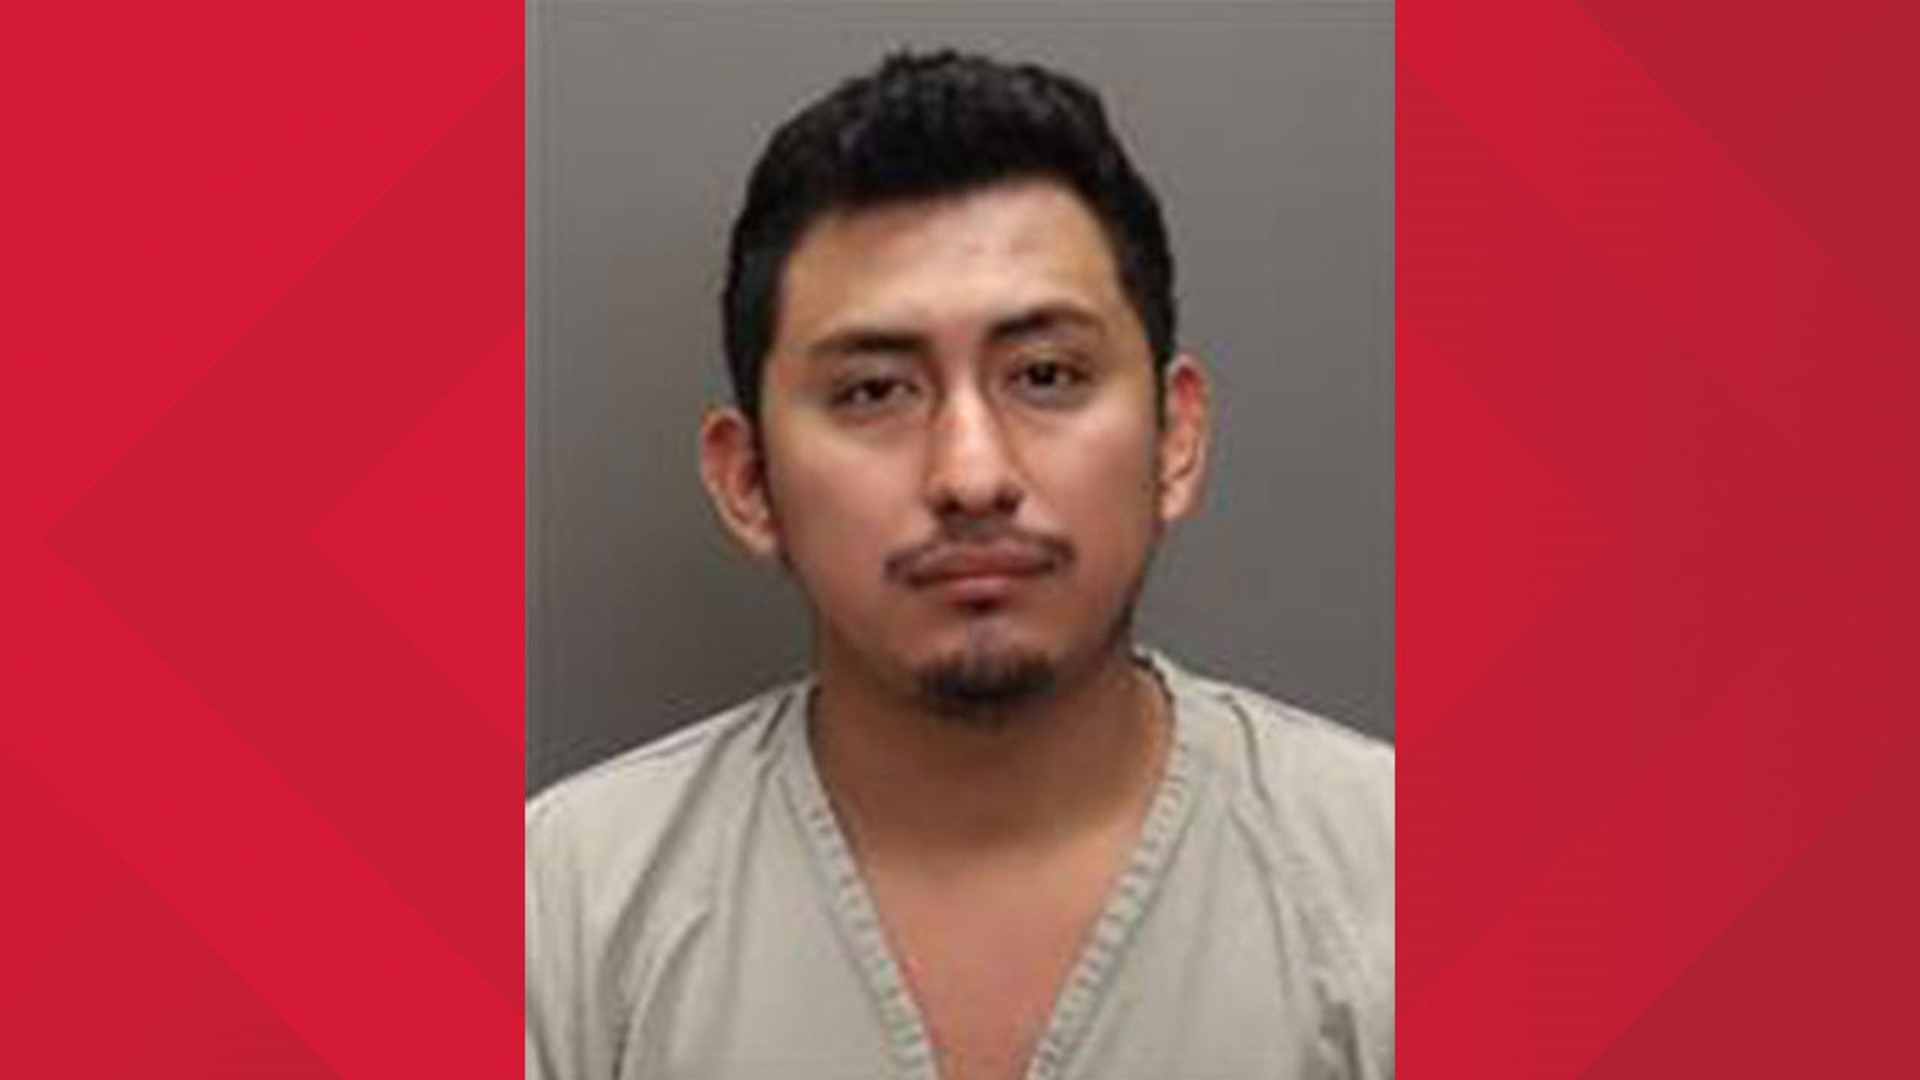 Court records say 27-year-old Gerson Fuentes has been charged with one count of rape involving a 10-year-old victim.